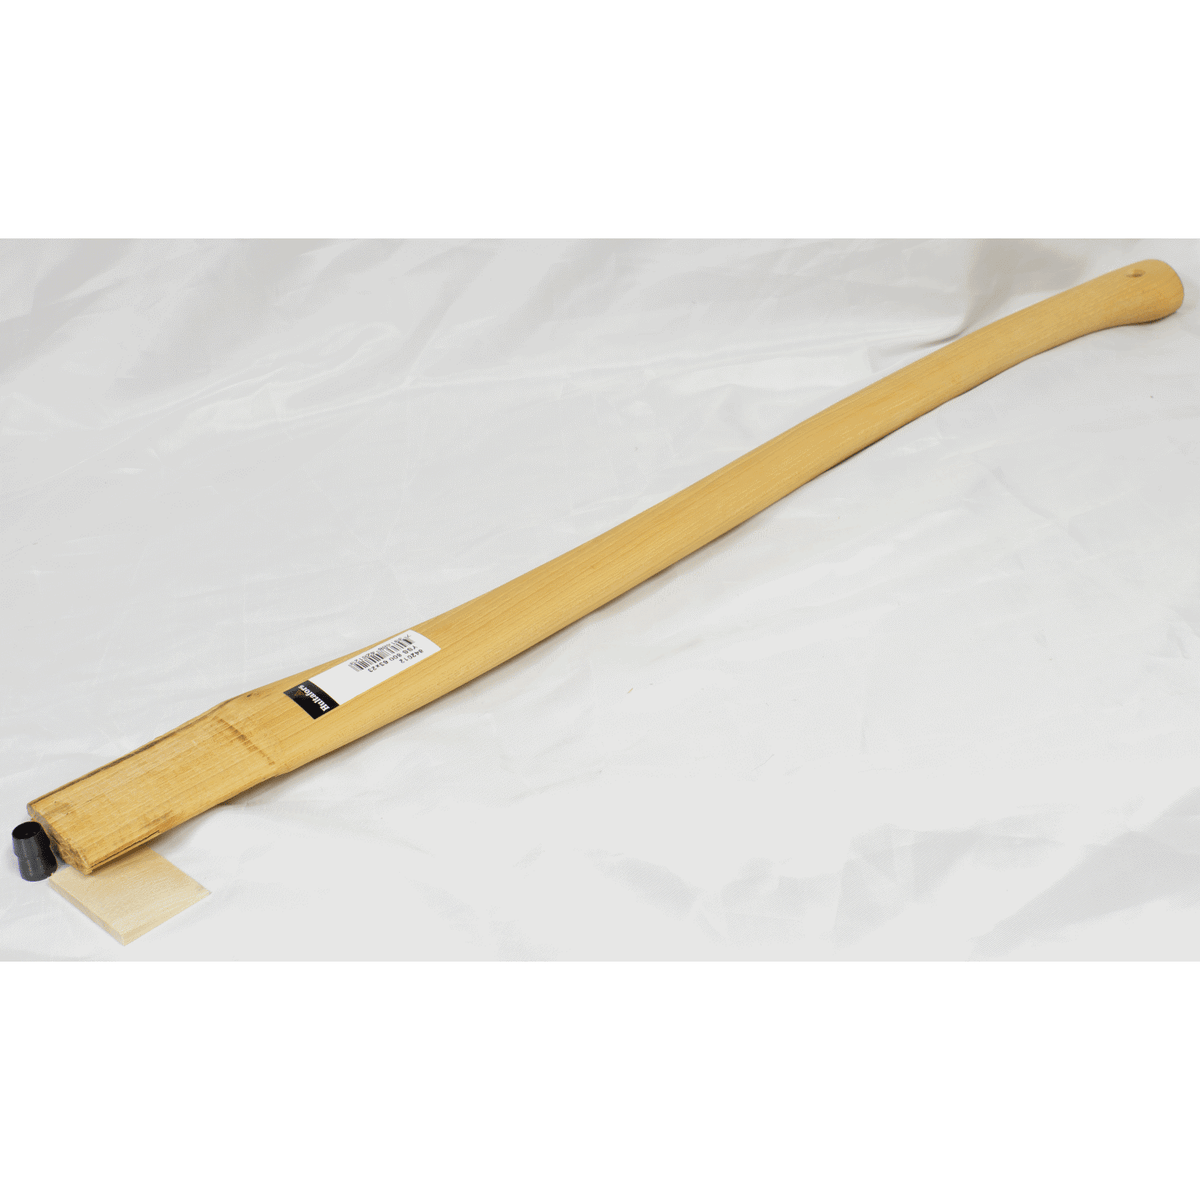 Spare Handle-Shaft for AGDOR Felling Axe, Montreal Pattern, Larger Model YSS 800 63x23 - Axeman.ca